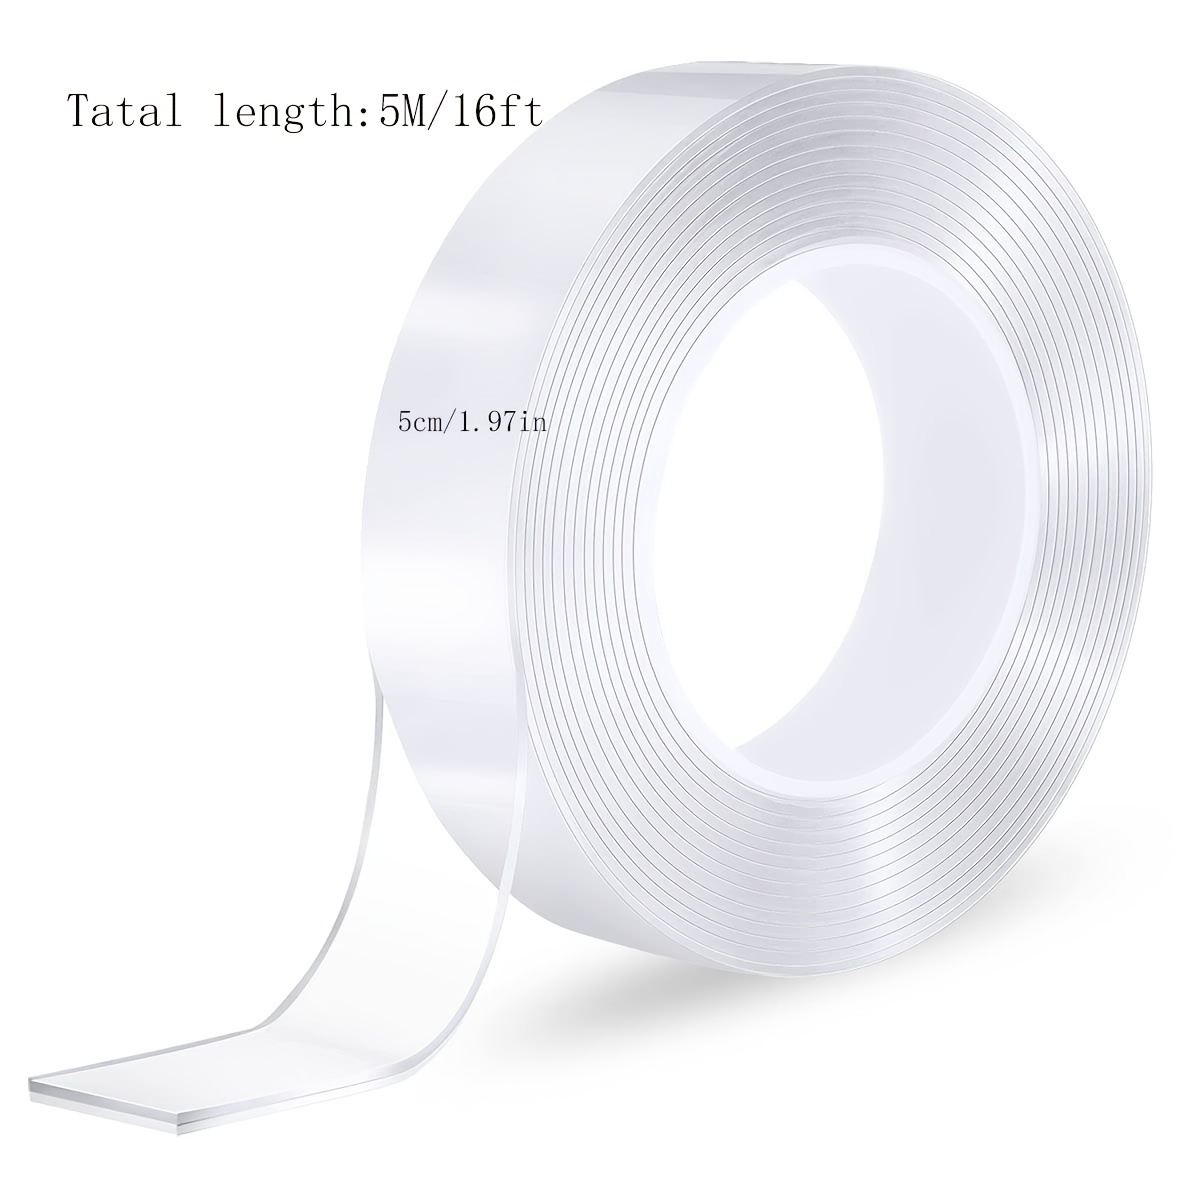 Strong Nano Double Sided Tape Heavy Duty Mounting clear - Temu